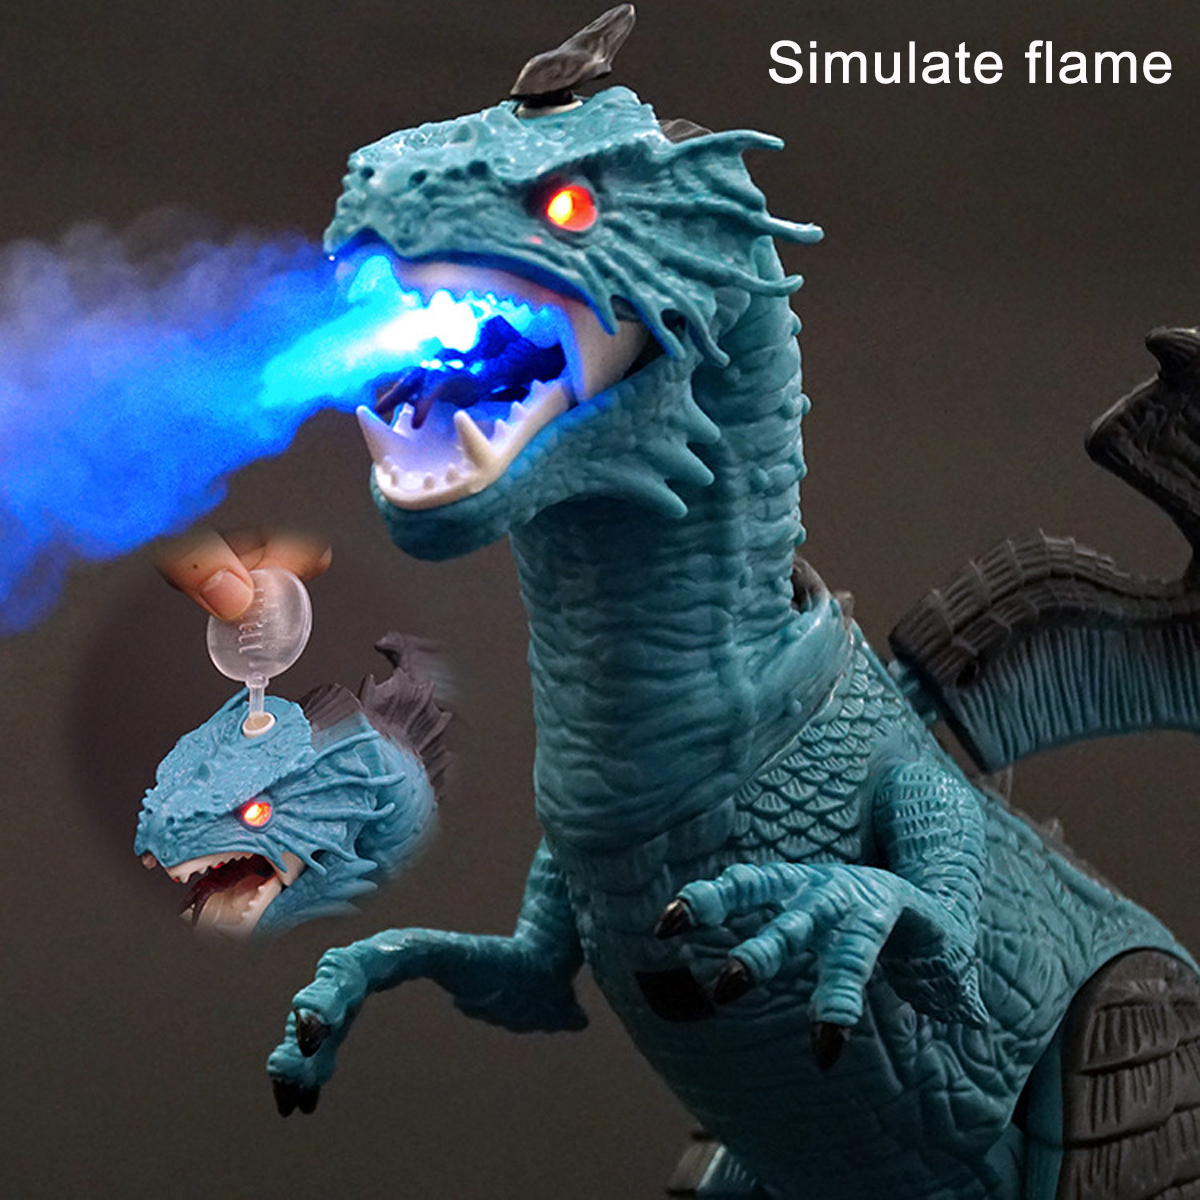 Remote-Control-360deg-Rotate-Spray-Dinosaur-with-Sound-LED-Light-and-Simulate-Flame-Diecast-Model-To-1773231-7